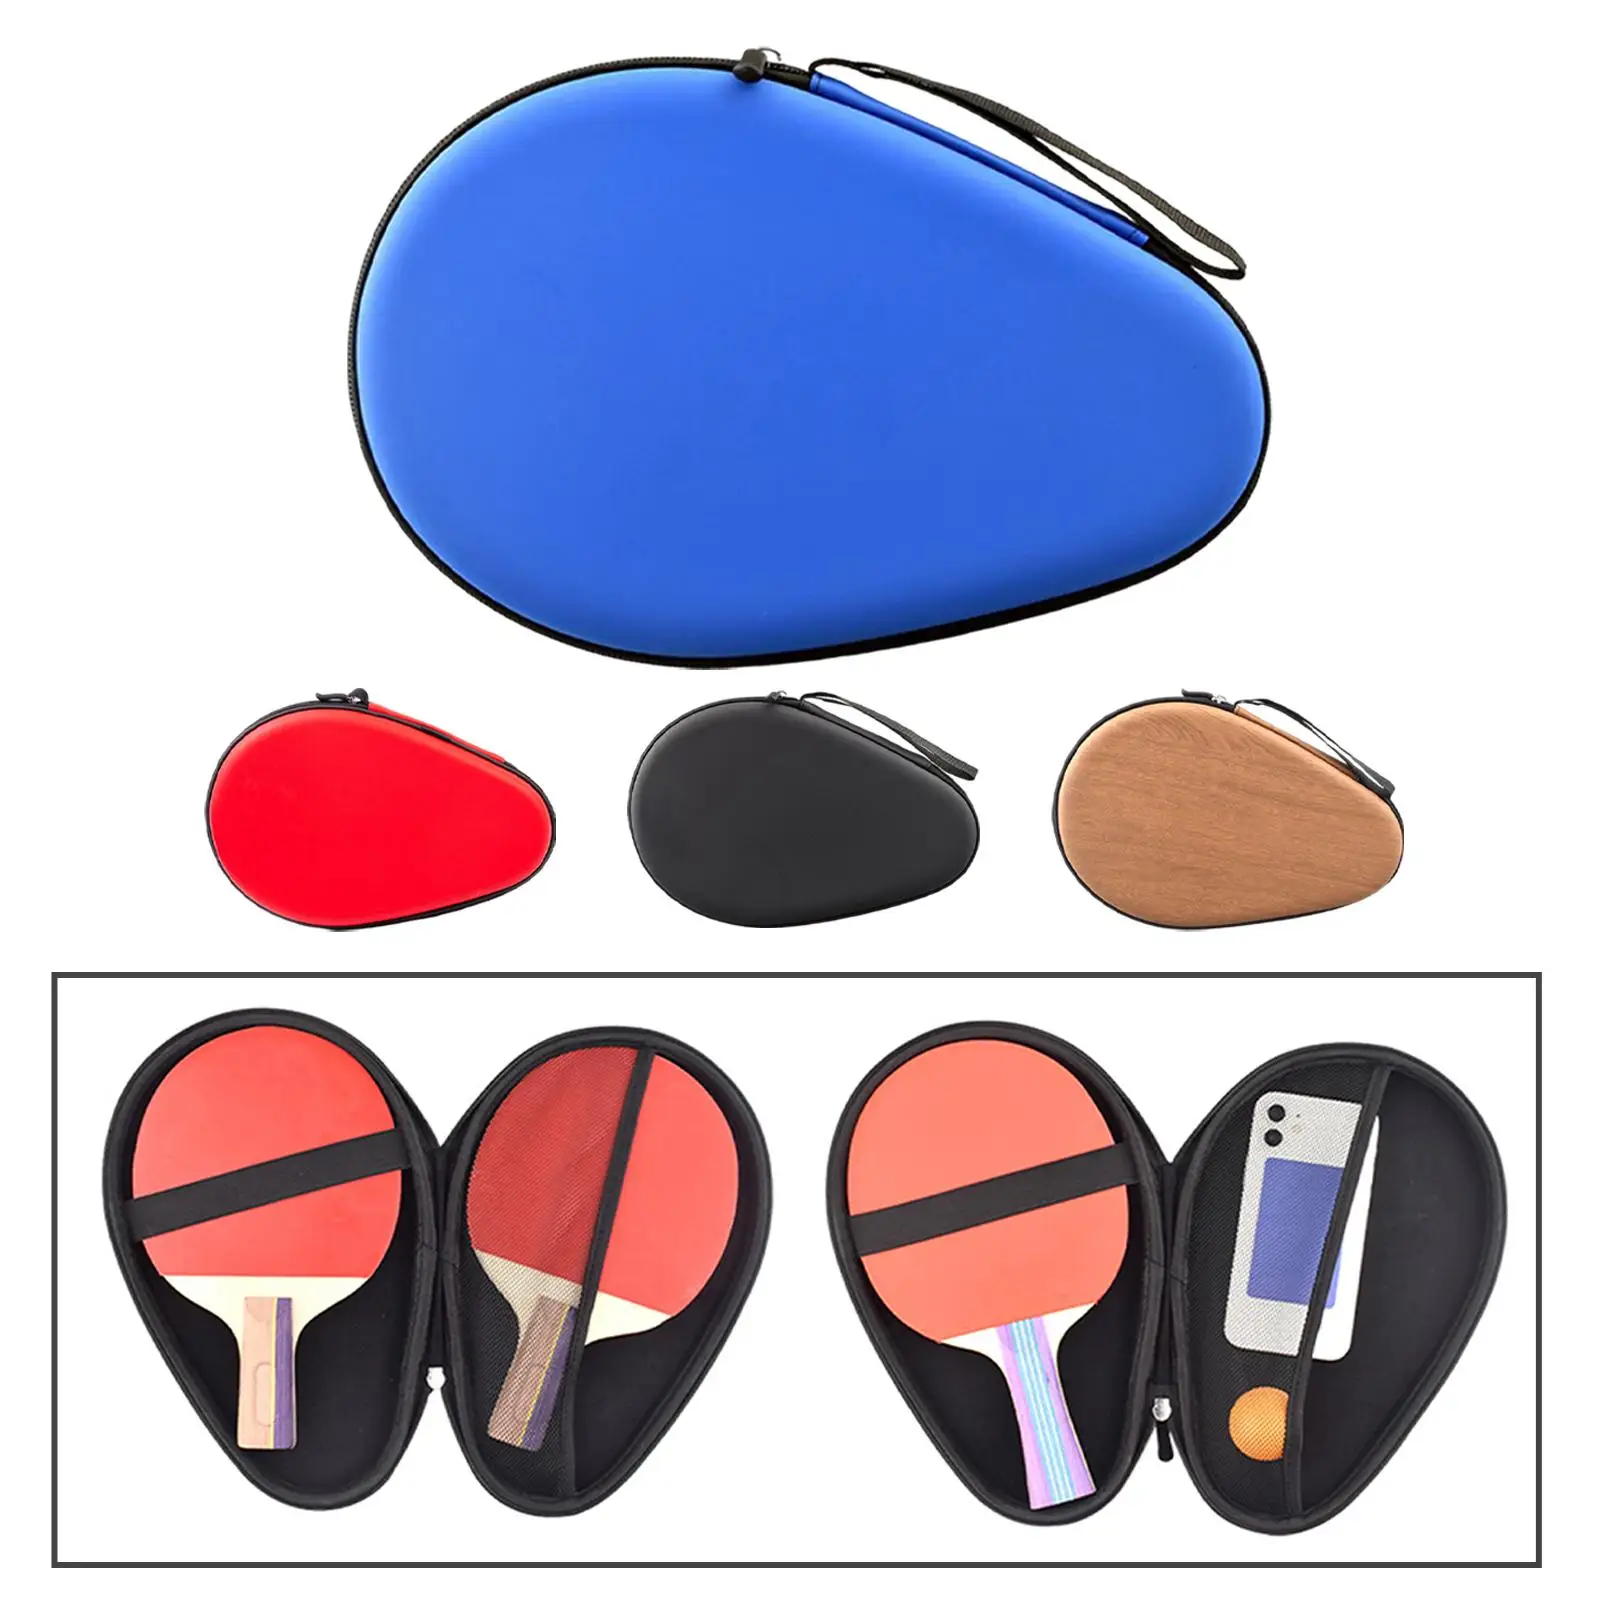 Portable Table Tennis Racket Bag Hard Gourd Reusable Durable Sturdy Ping Pong Paddle Pocket Table Tennis Protector for Travel